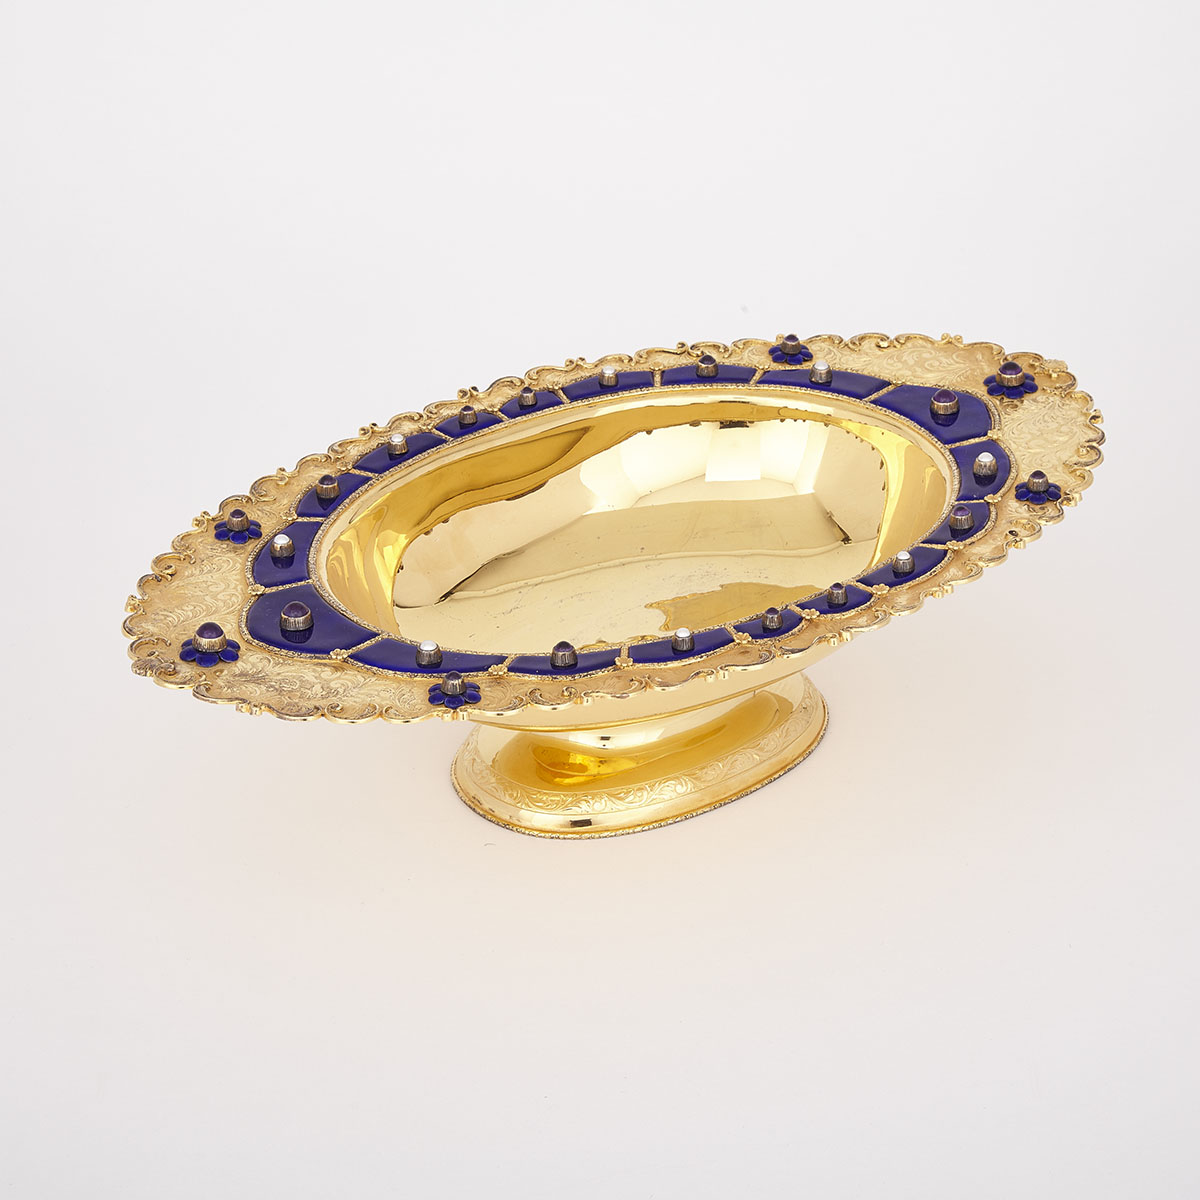 Continental Silver-Gilt and Enamel Oval Footed Bowl, probably Italian, 20th century